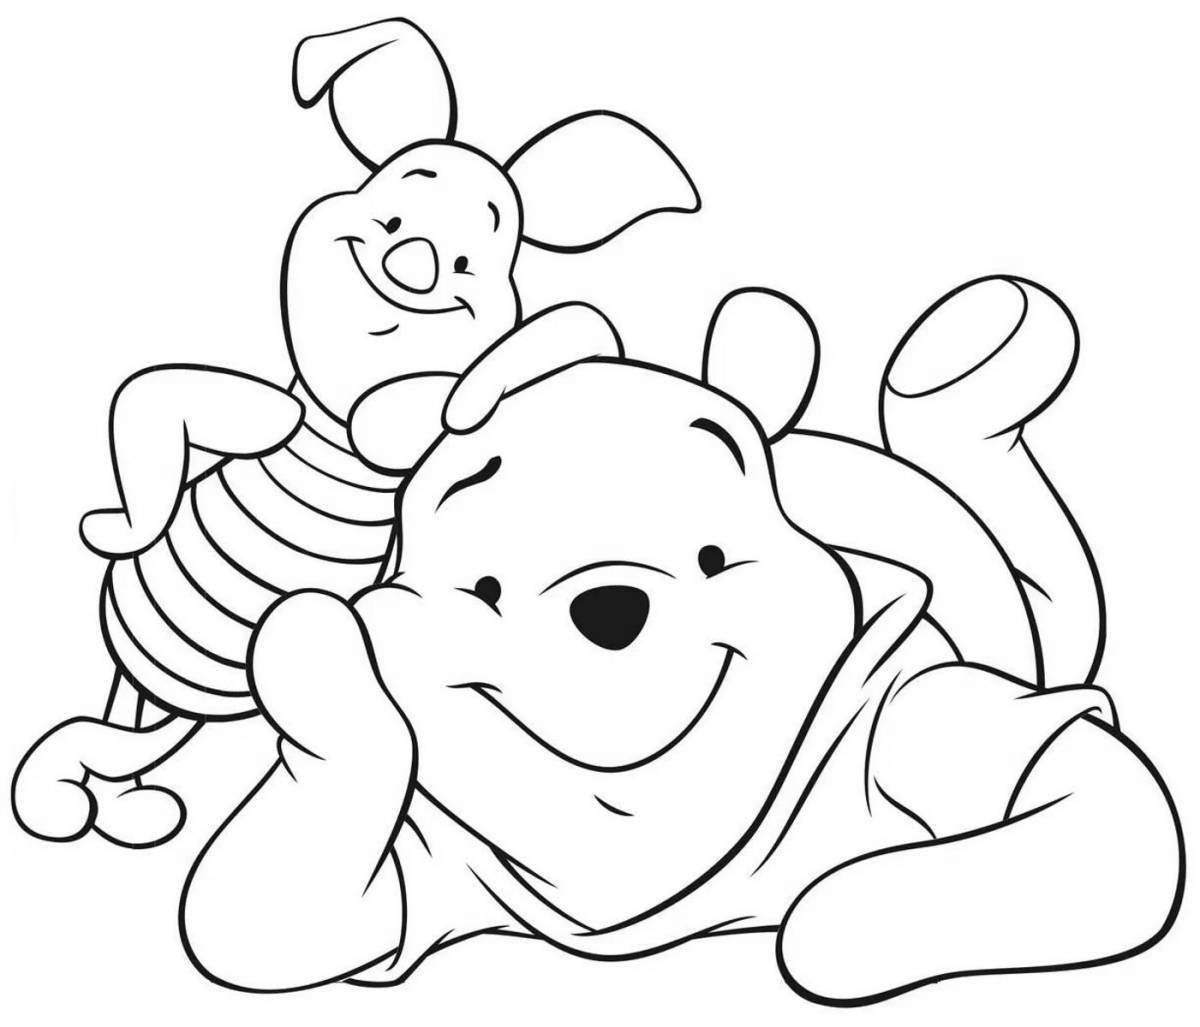 Coloring book shining winnie the pooh